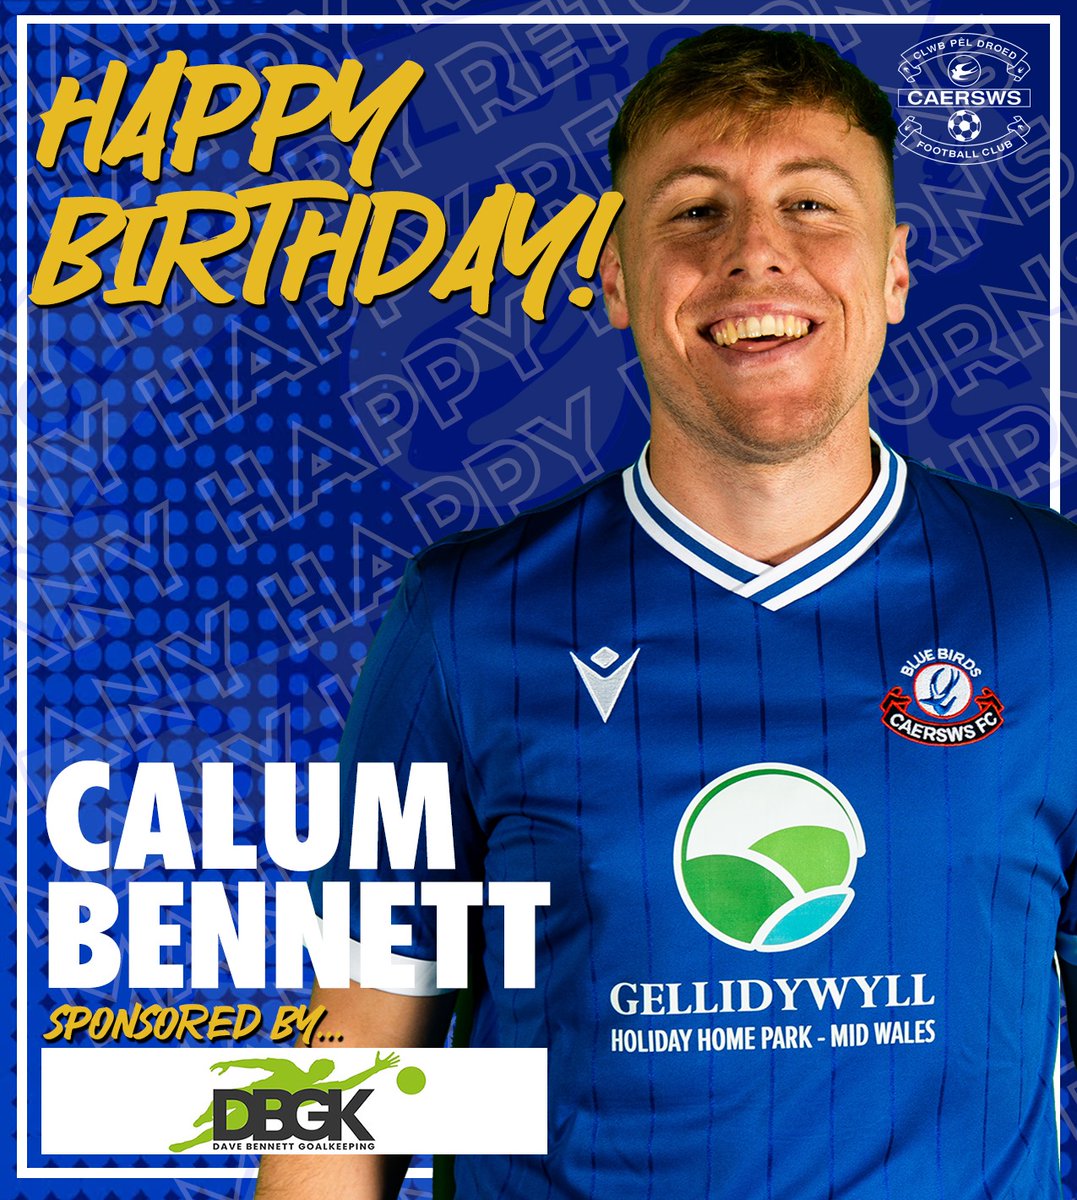 Happy birthday @CalumBennett98 . From us all at the club 🔵⚪️🔵